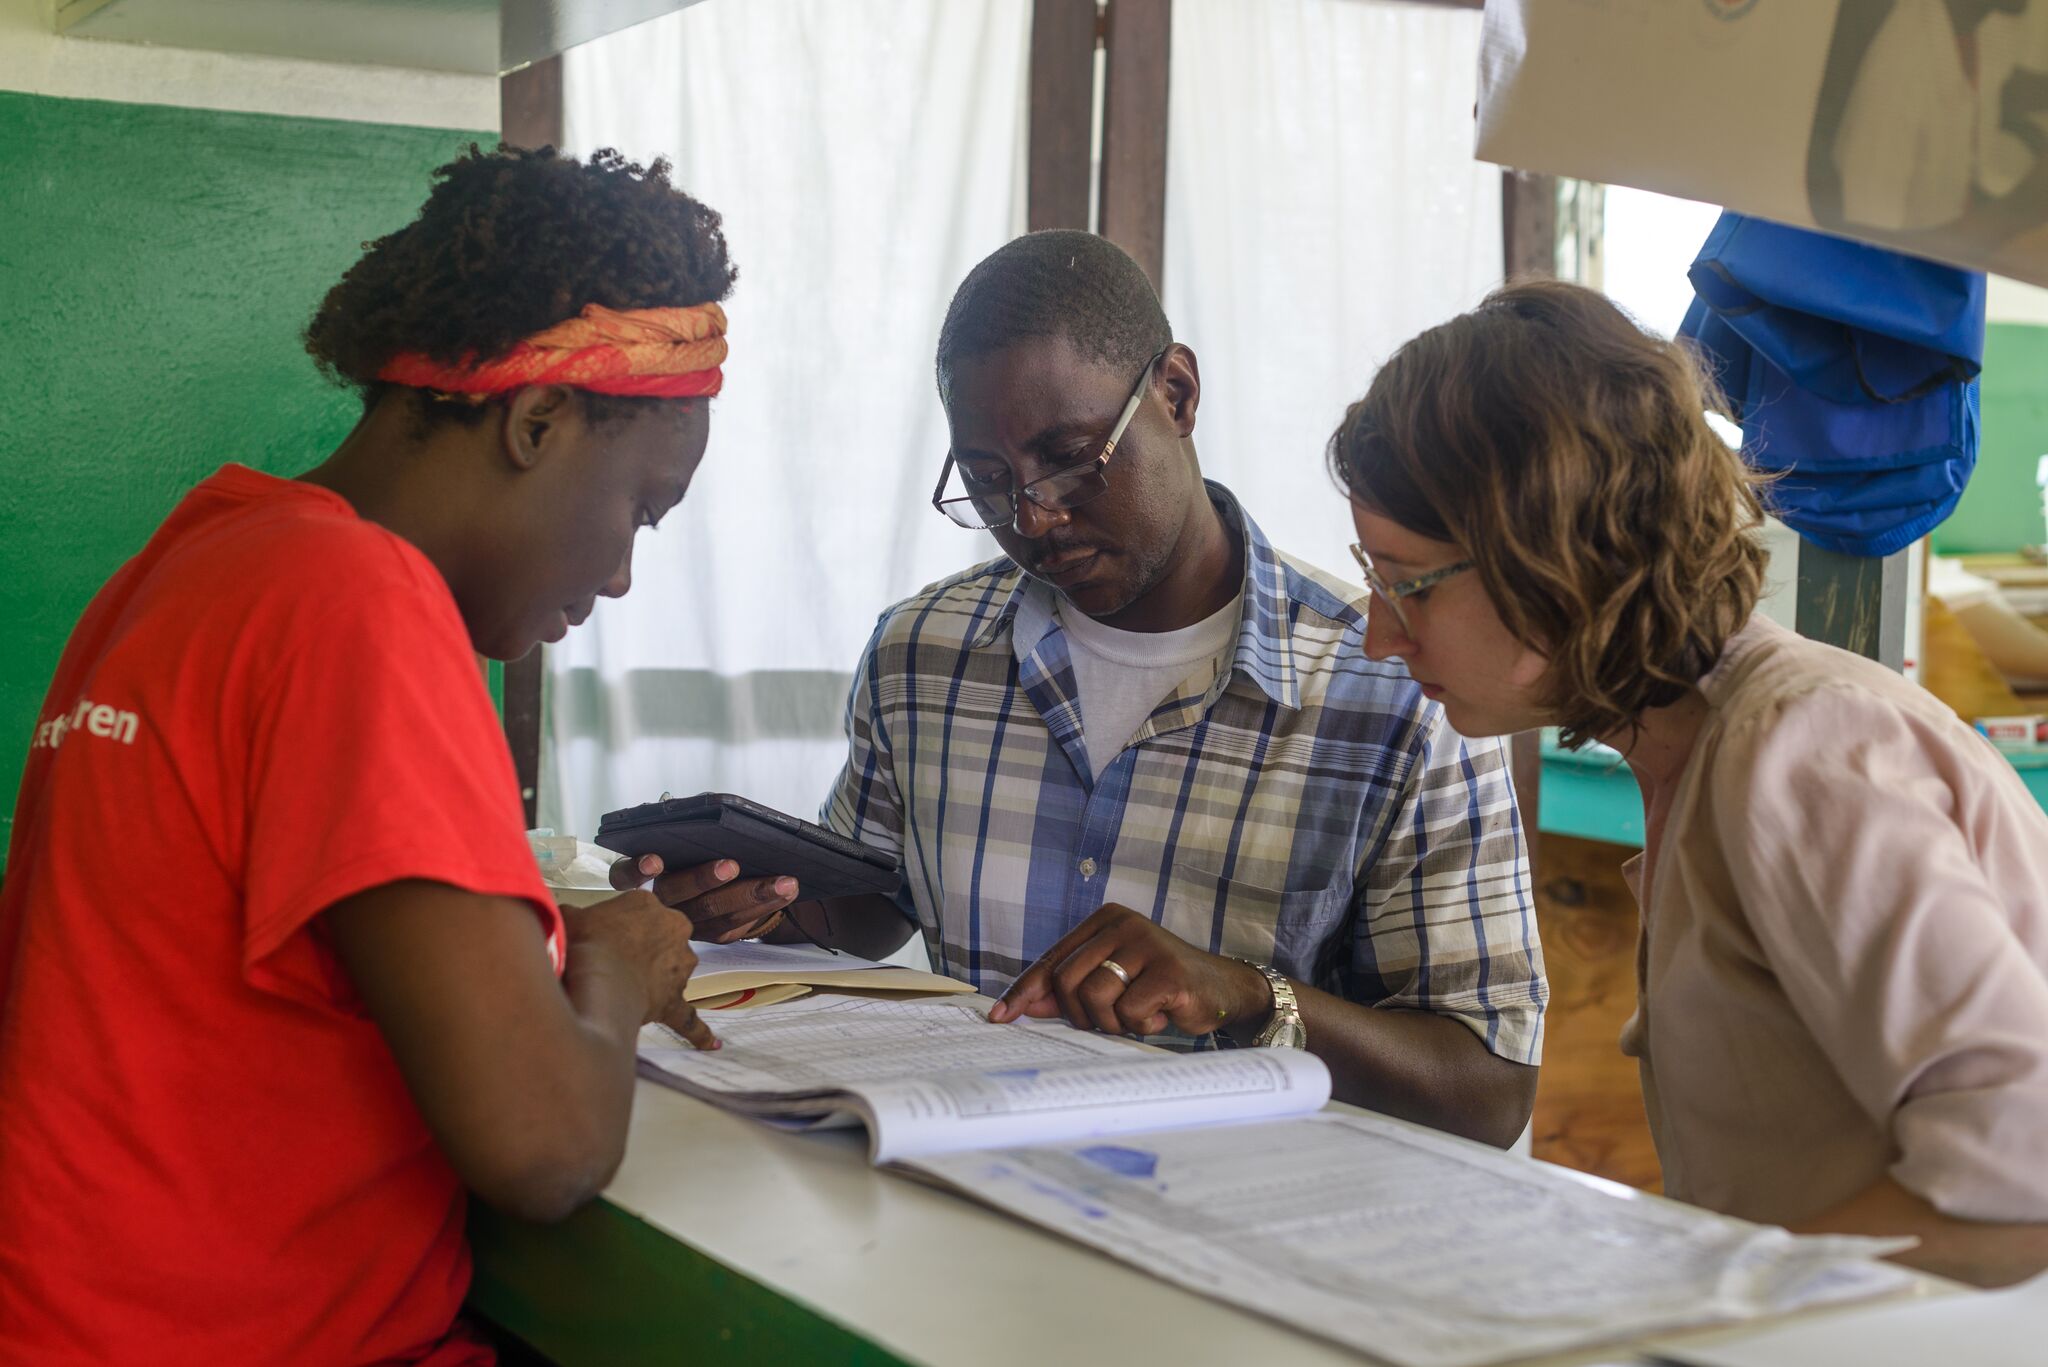 Hayley Welgus (far right) works with Save the Children colleagues in Haiti.